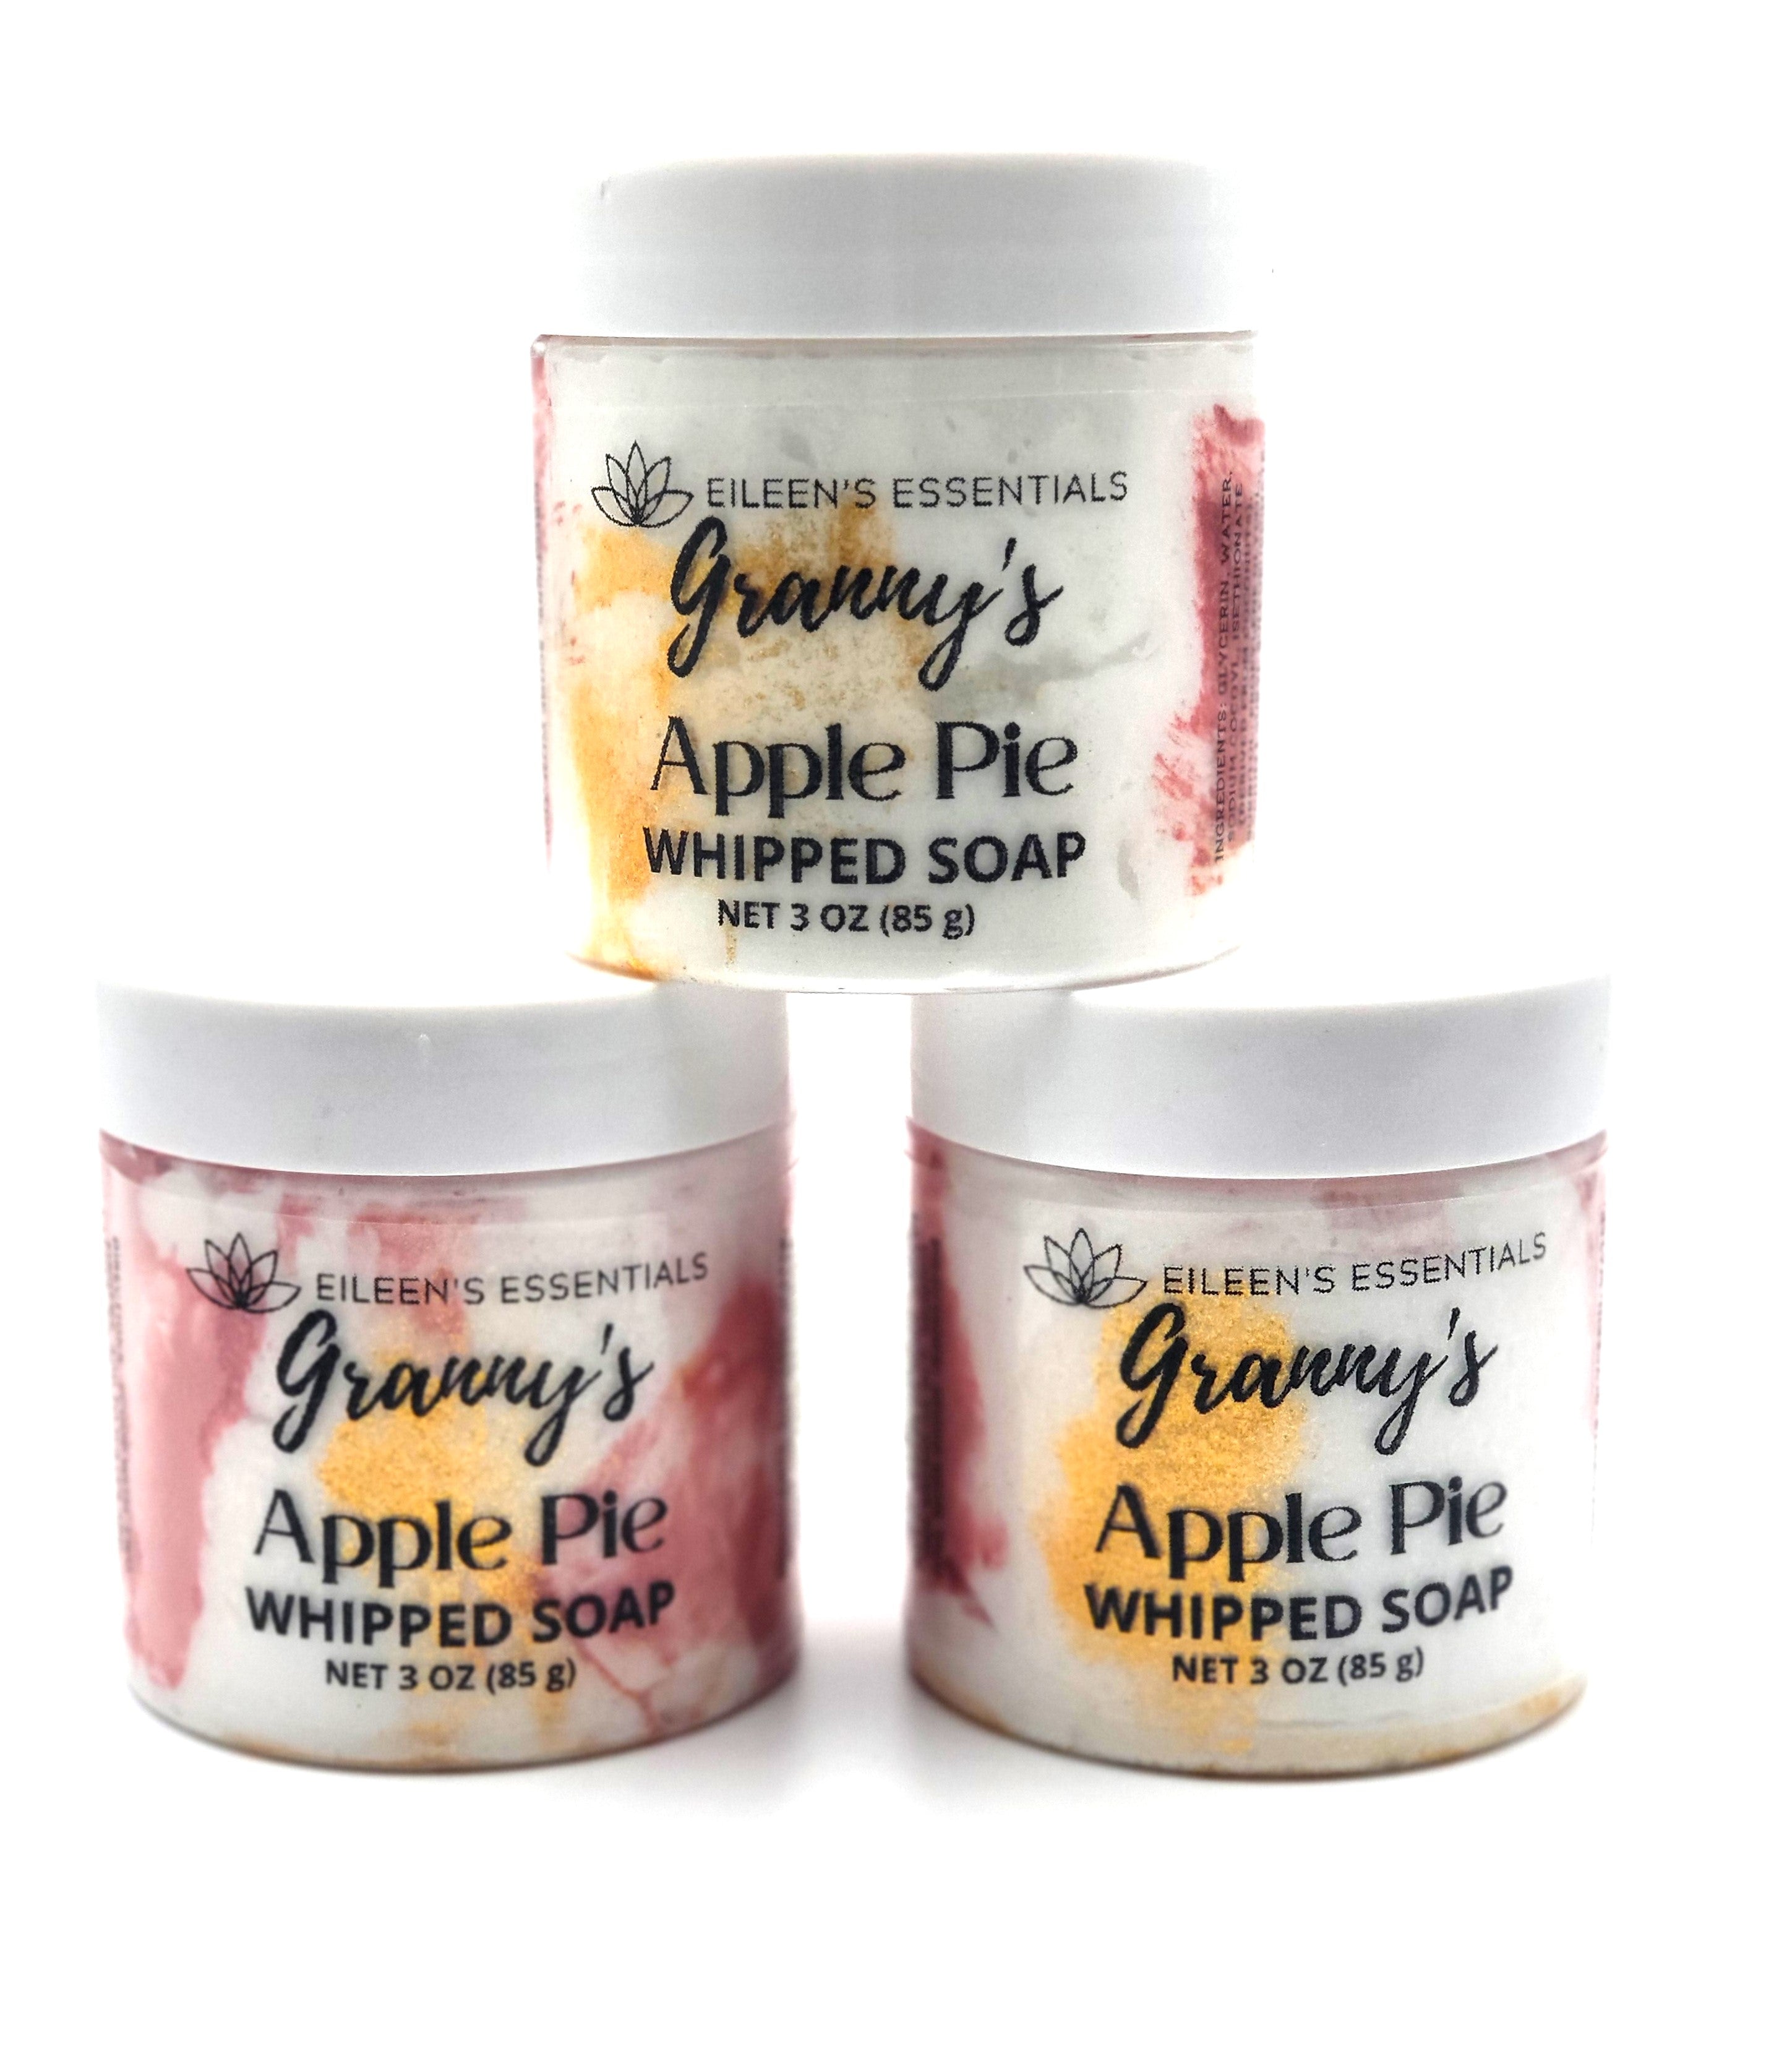 Limited Edition "Granny's Apple Pie" Whipped Soap